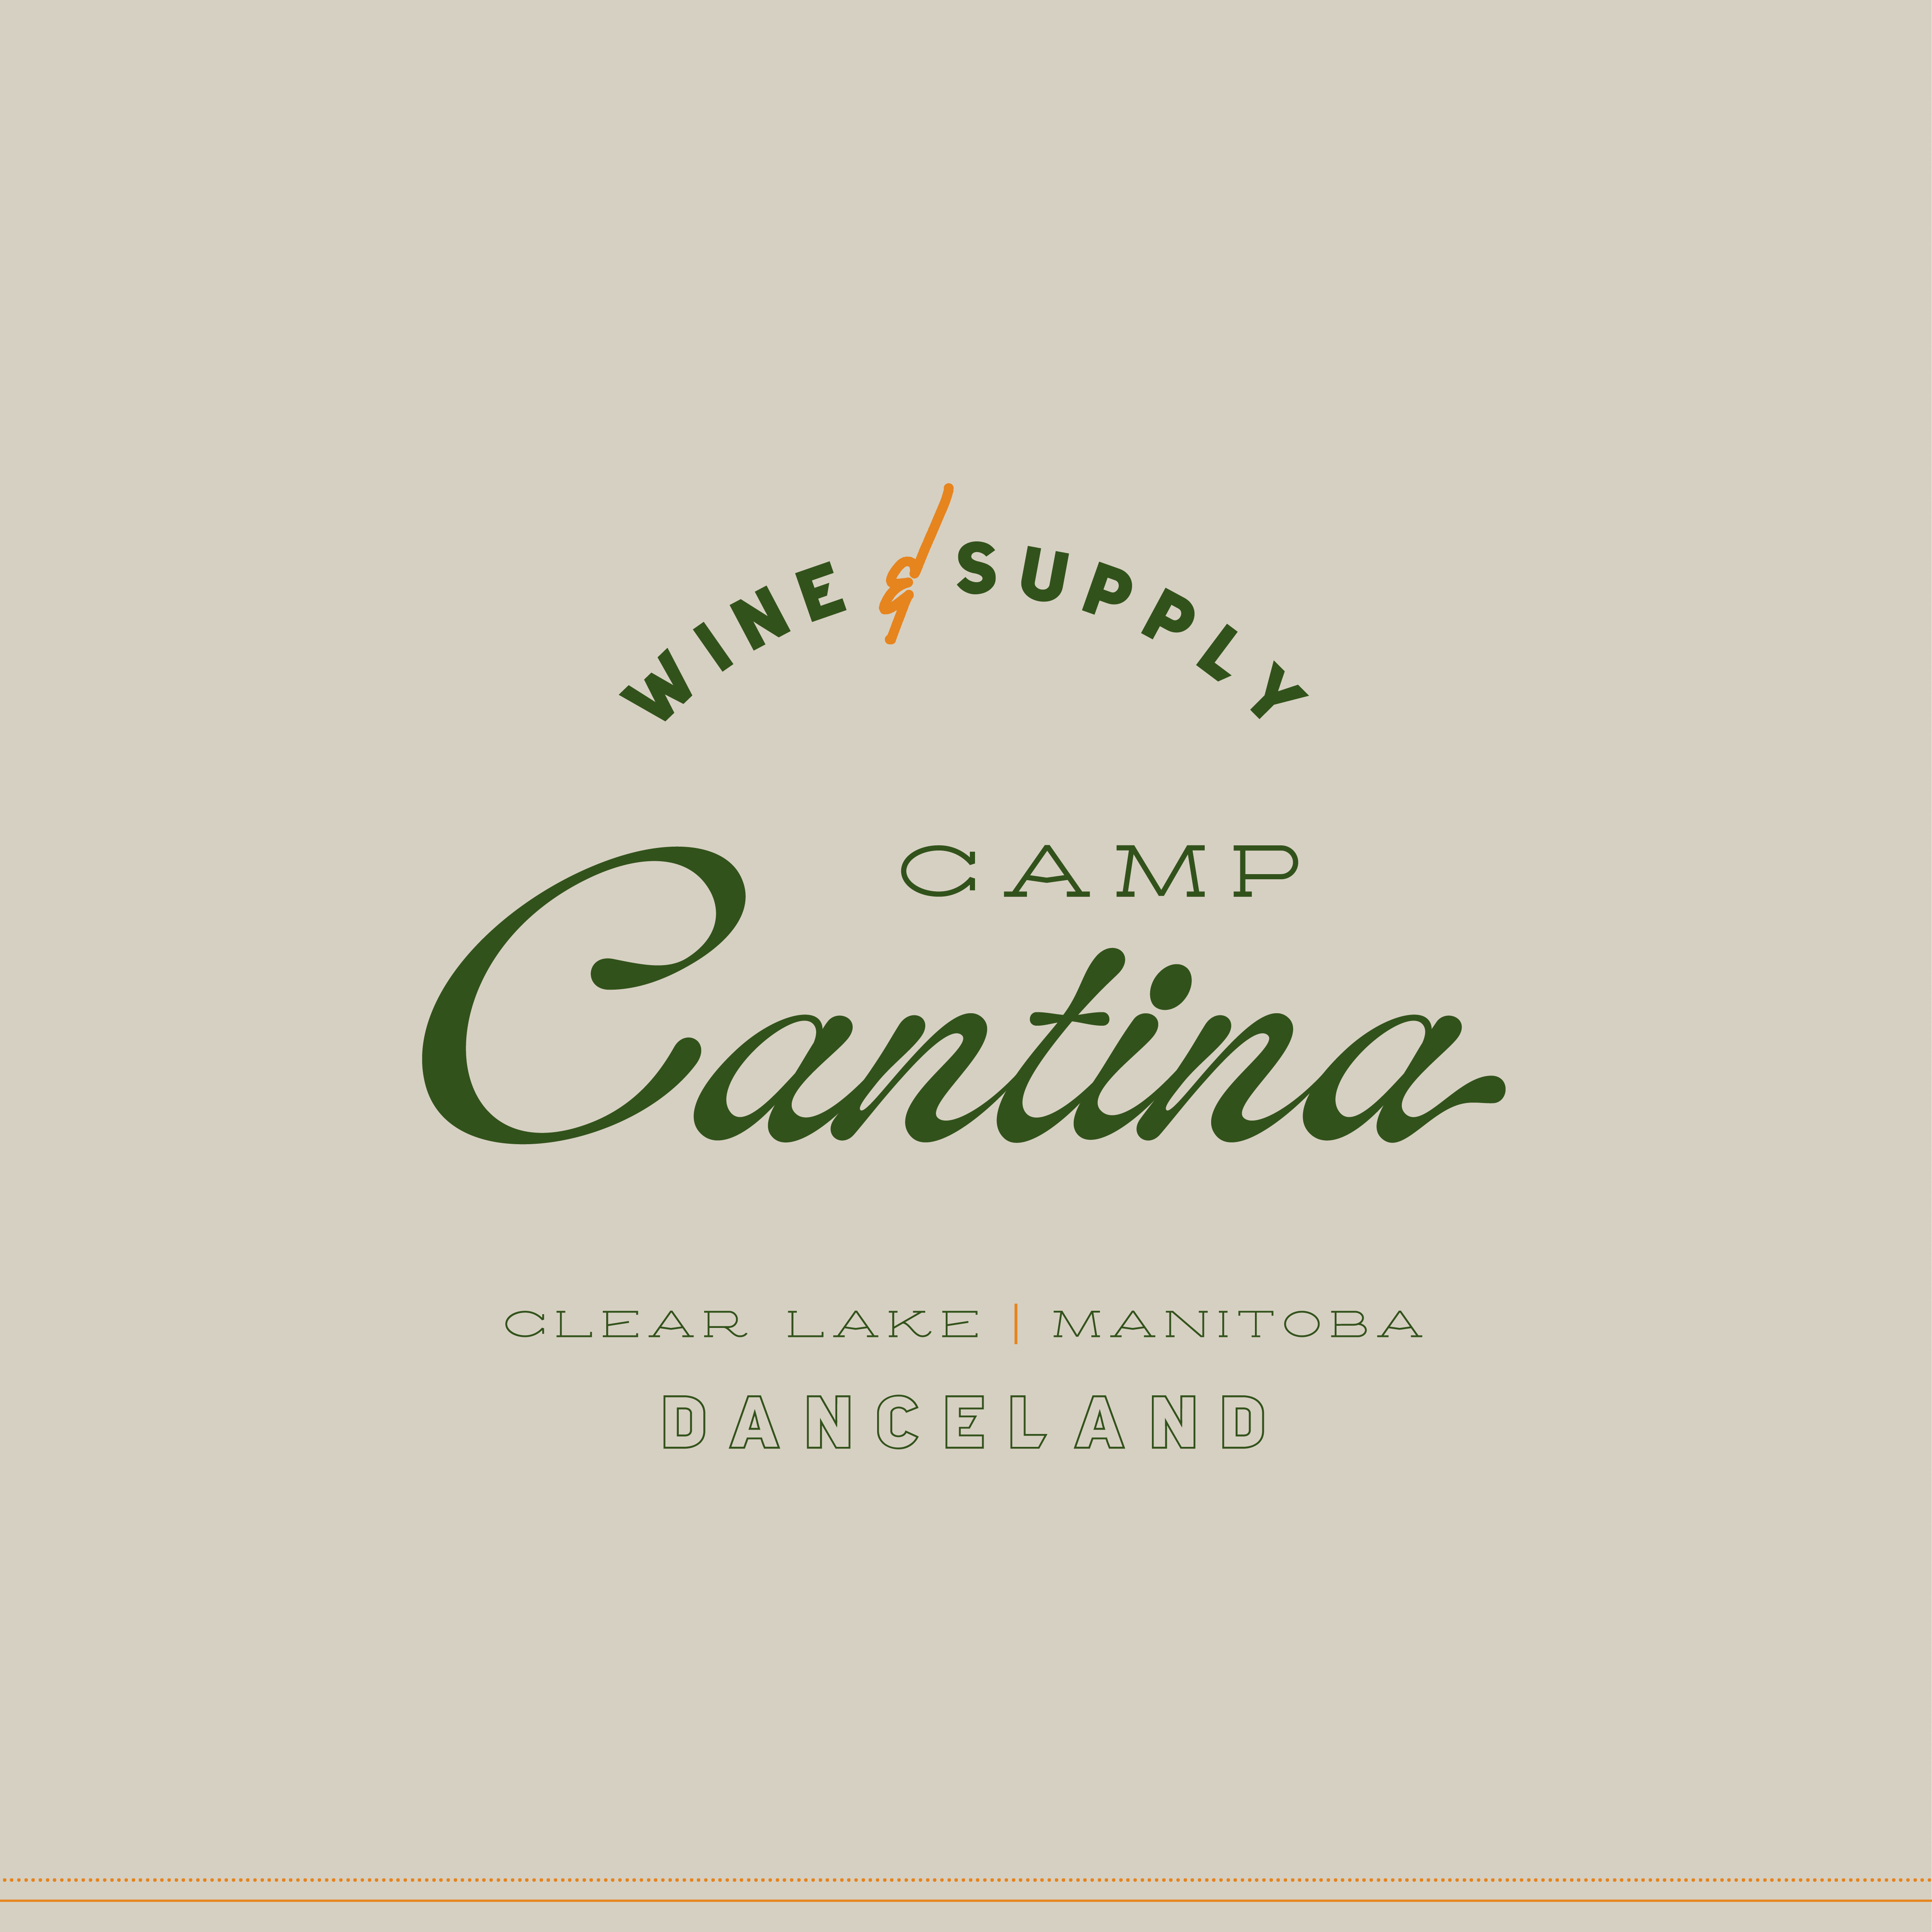 Camp Cantina Wine and Supply branding